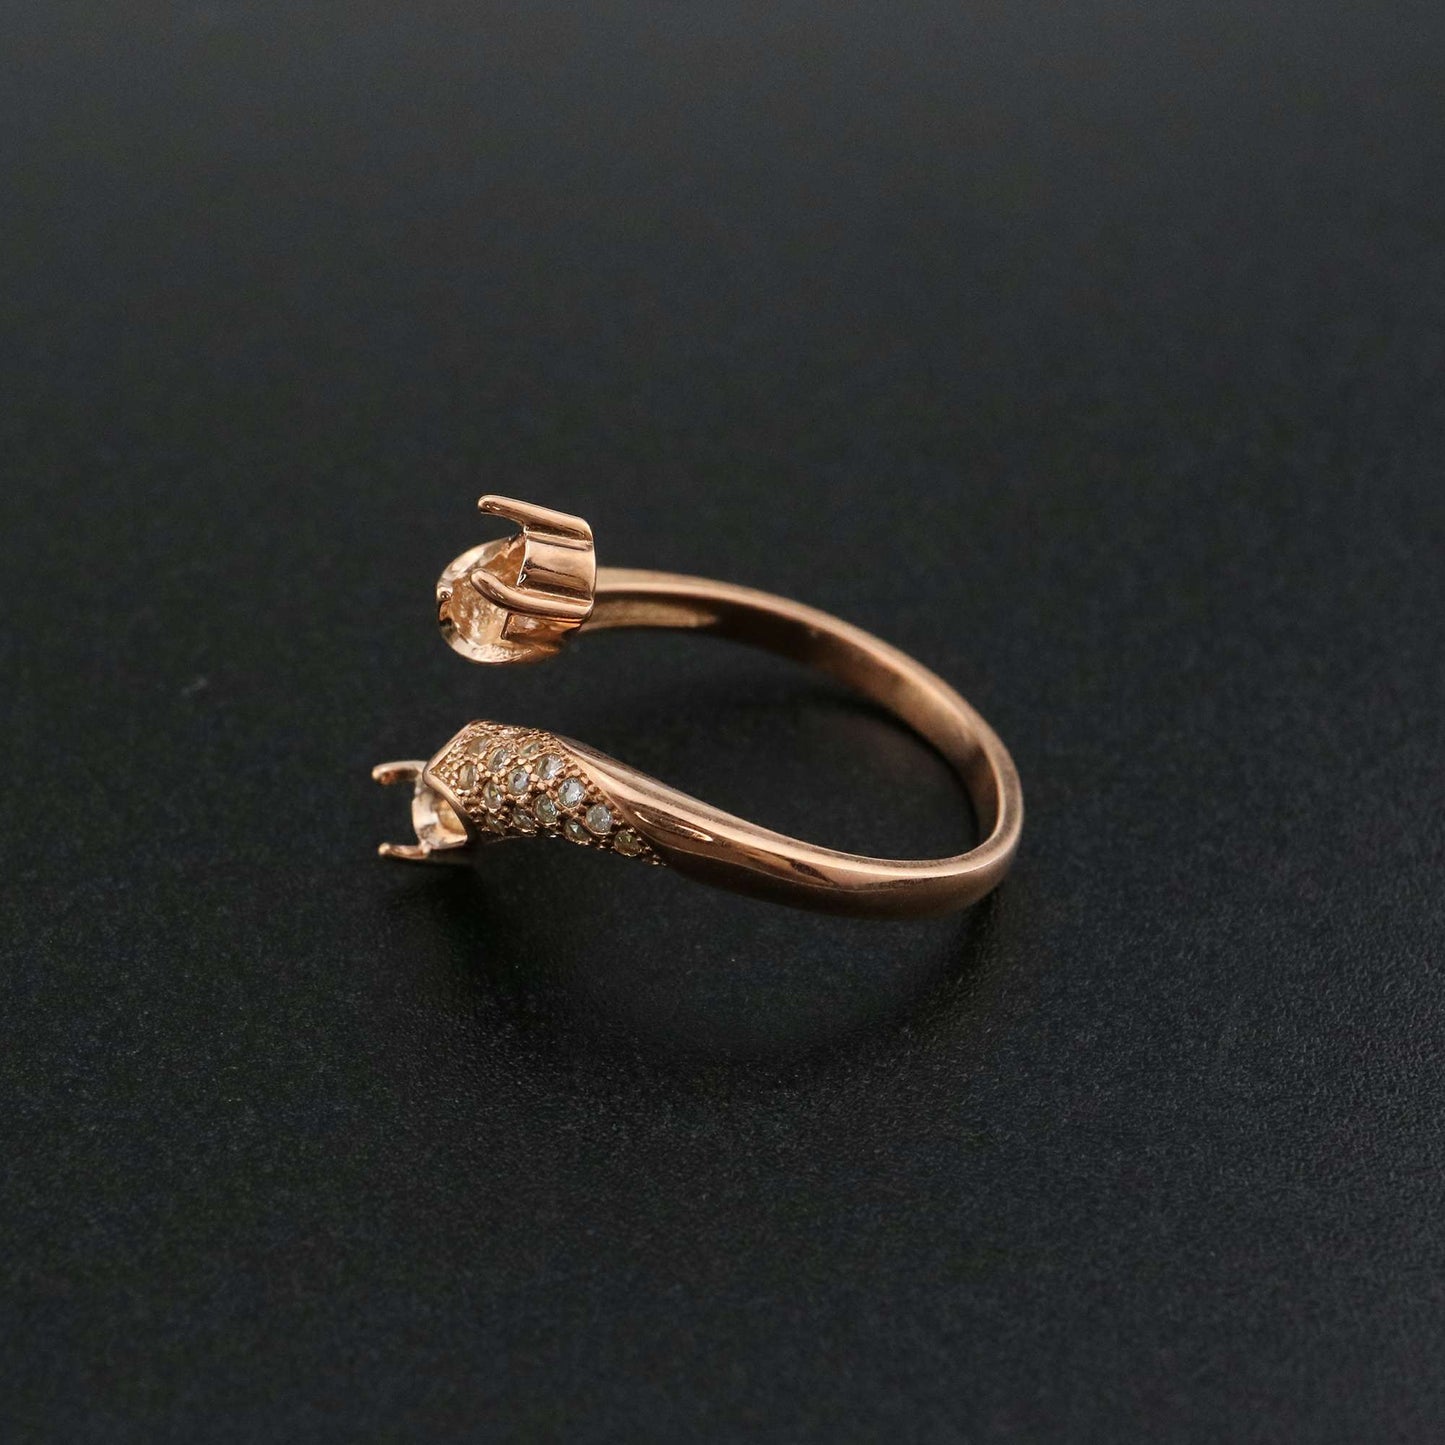 A rose gold oval scale wrap around bypass semi mount